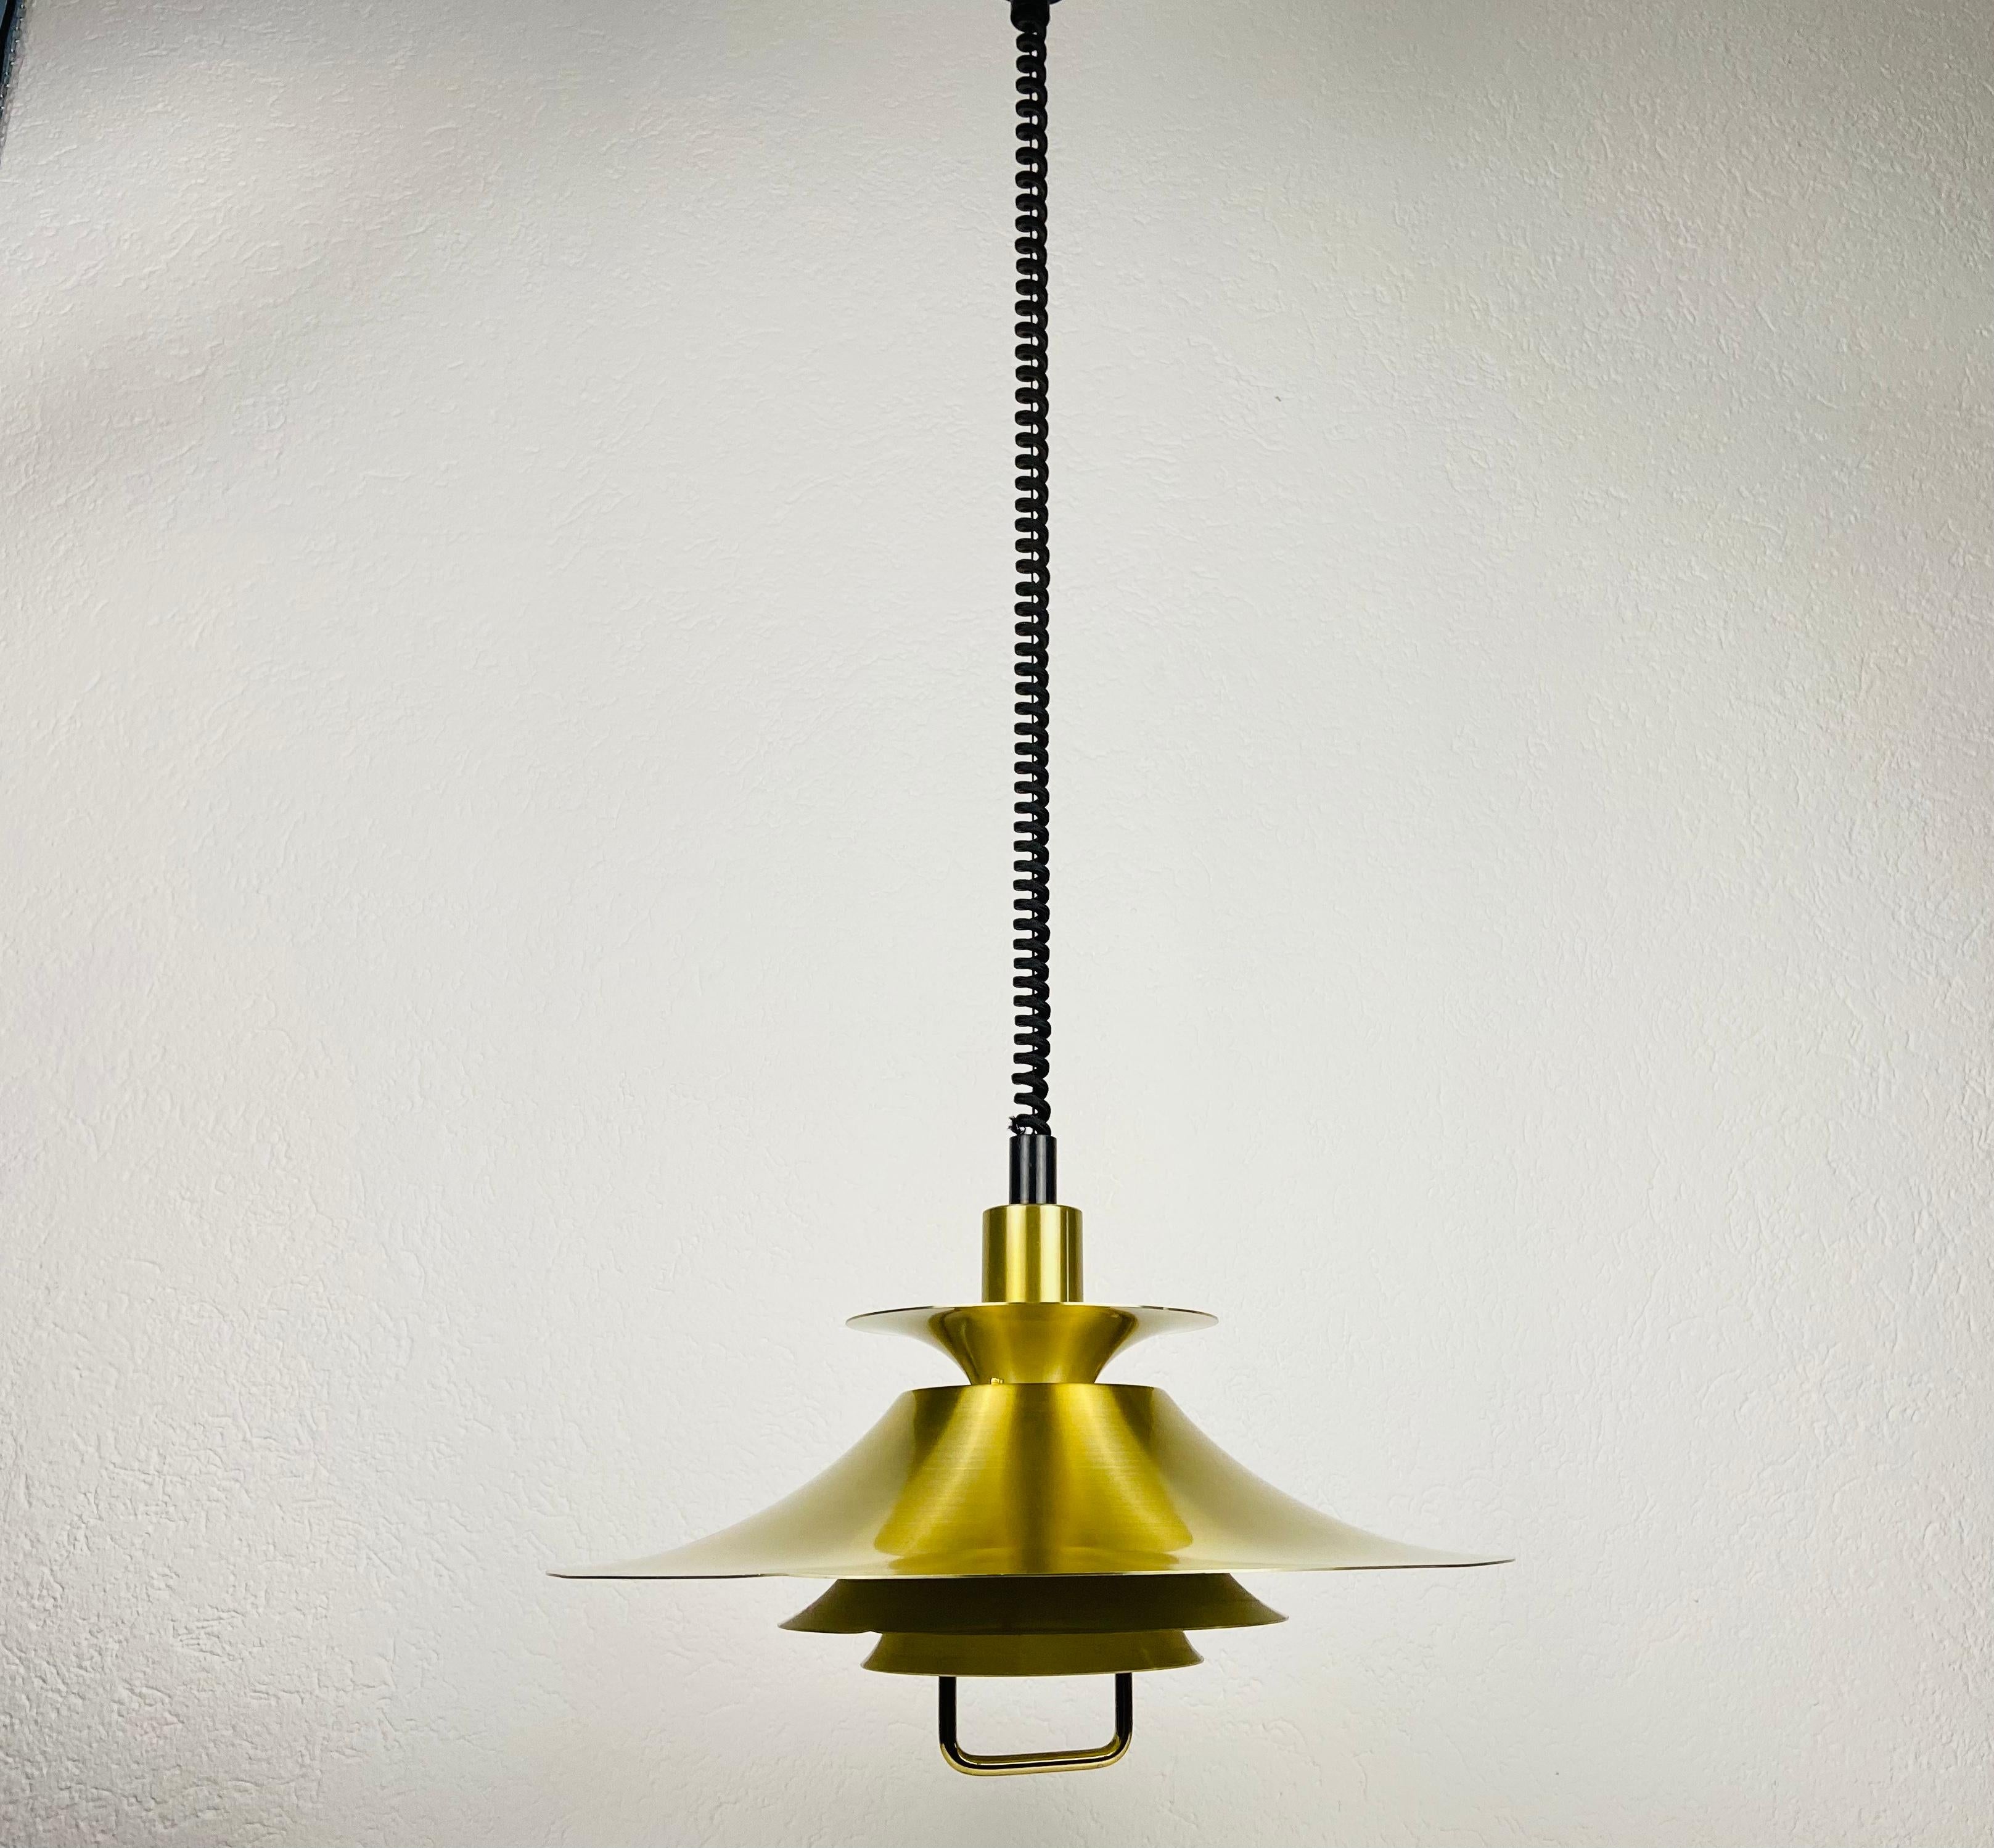 Danish brass and metal pendant lamp made in Germany in the 1960s. The fixture gives a very beautiful light. It is made from thin aluminum and brass.

Measurements:
Height 73-135 cm
Diameter 48 cm

The light requires one E27 light bulb. Works